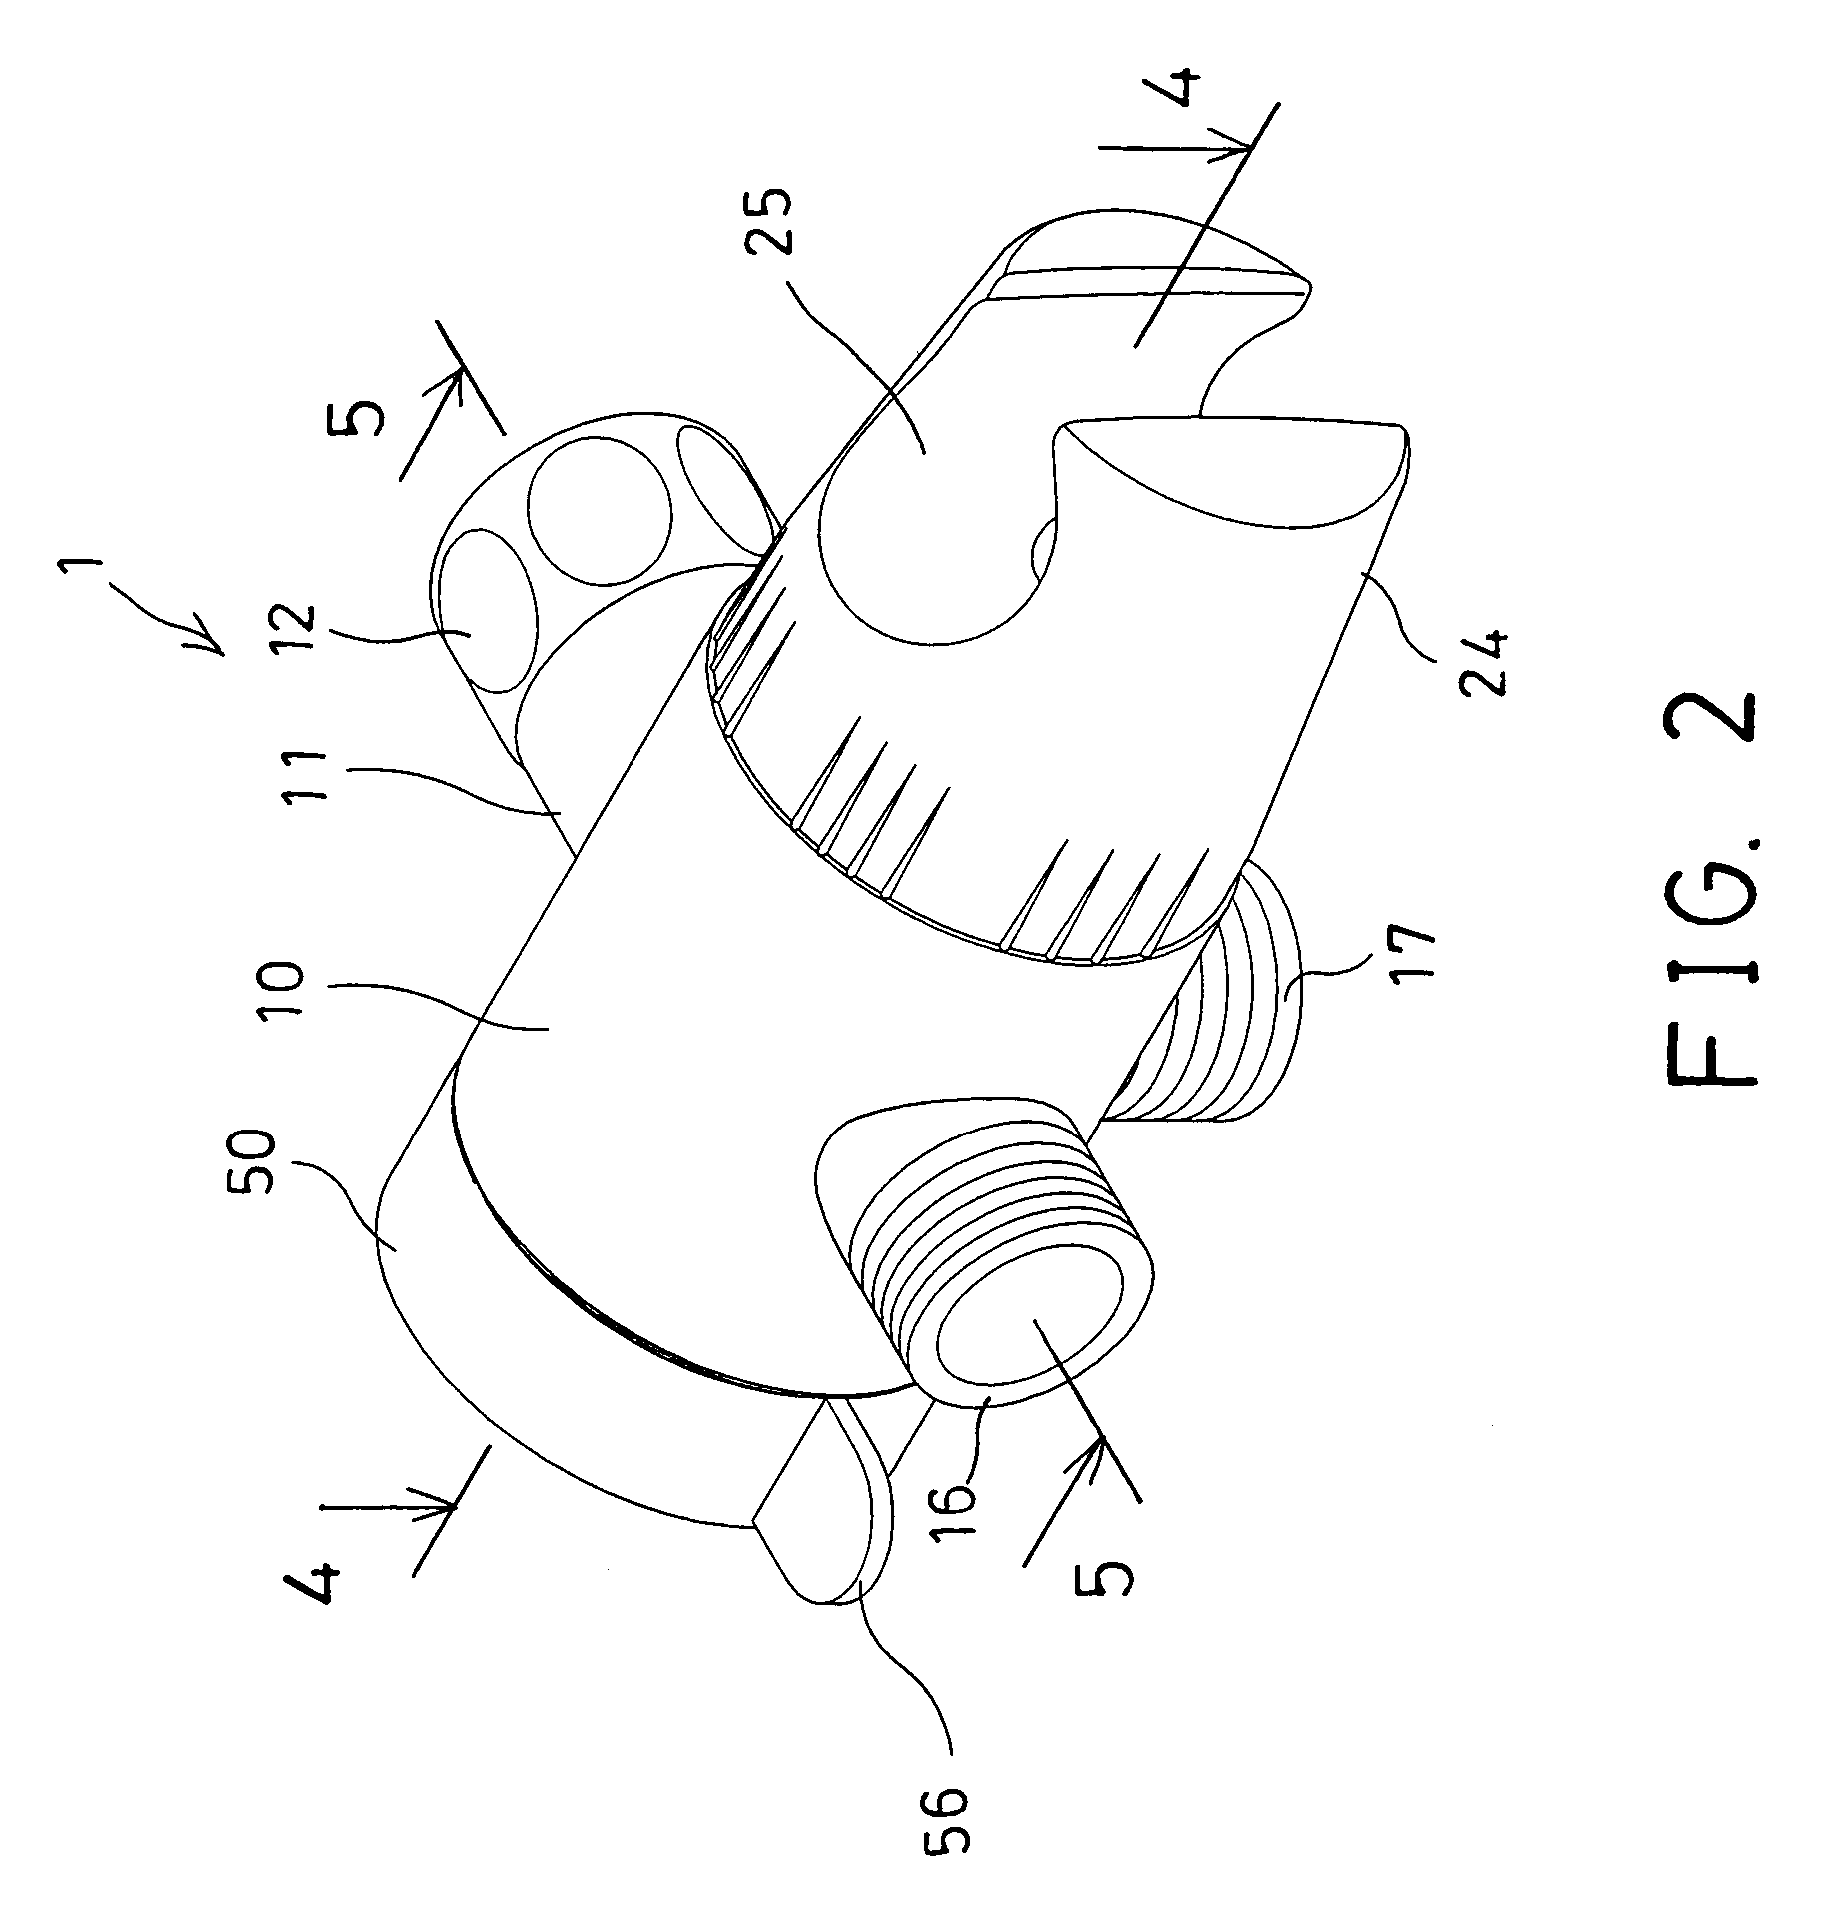 Holder device for shower head and nozzle